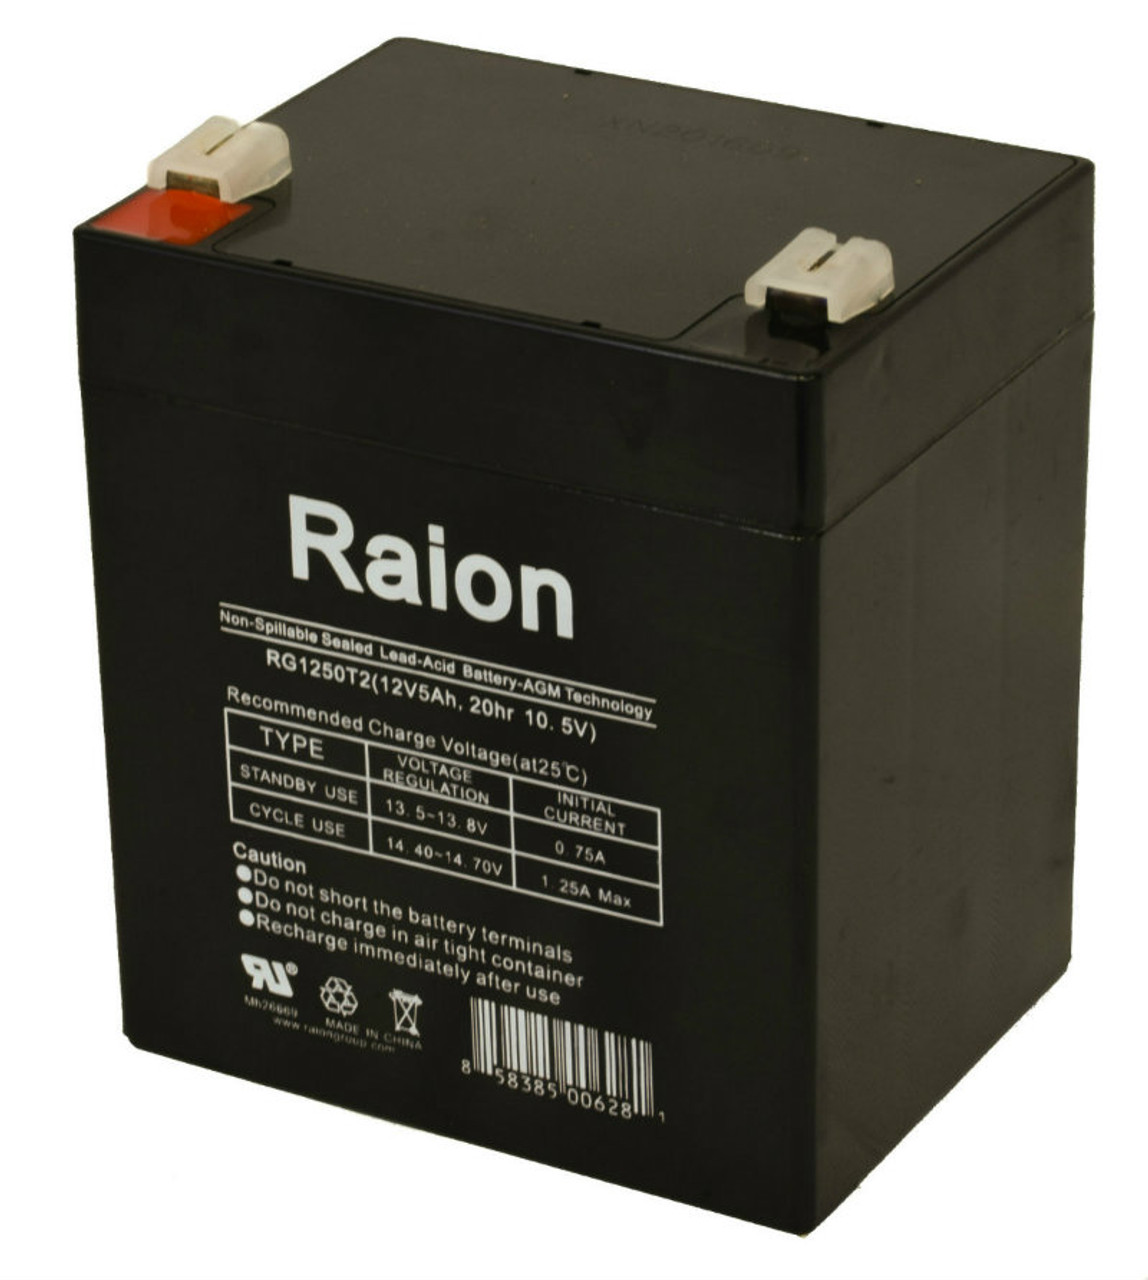 Raion Power RG1250T1 Replacement Battery for Sunforce 77755 7.5 Million Candle Power Spotlight